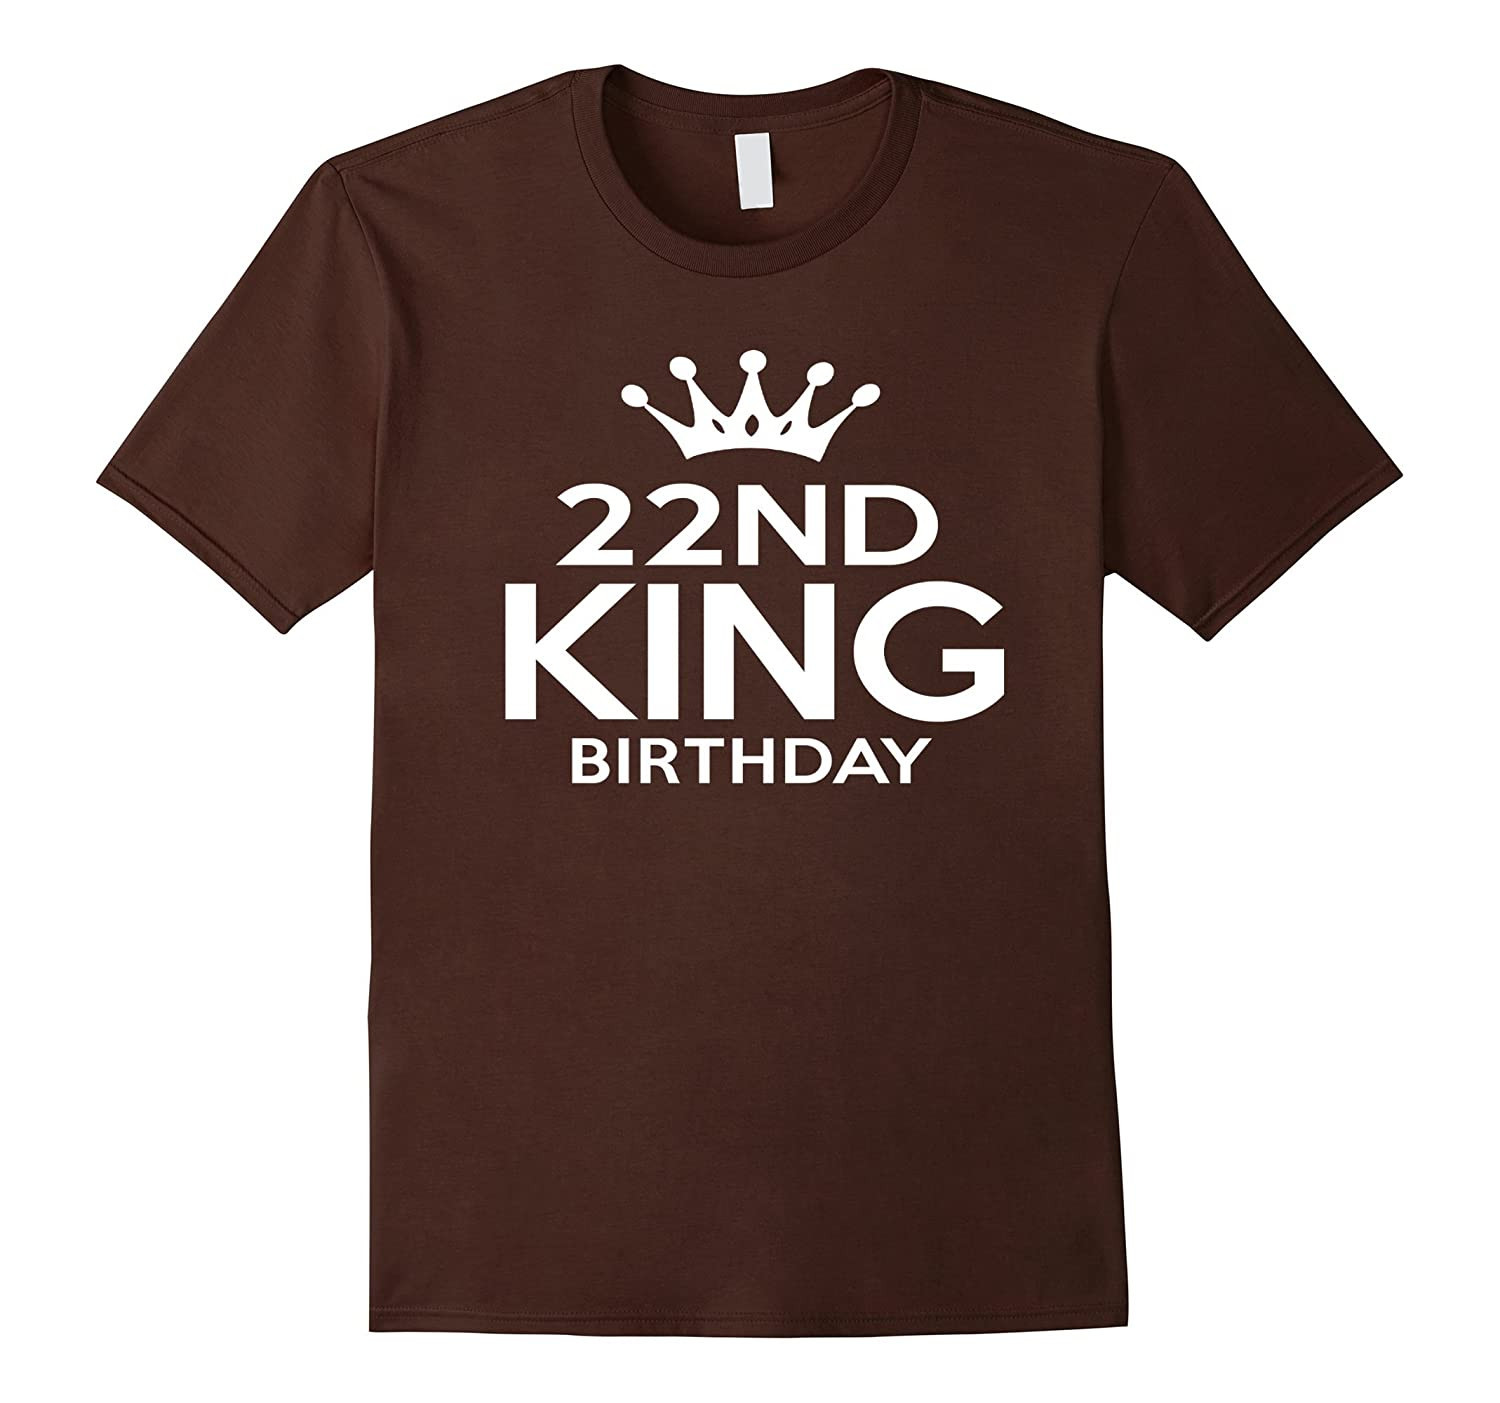 22 Year Old Birthday Gift Ideas
 22nd King 22 Year Old 22nd Birthday Gift Ideas for himmen